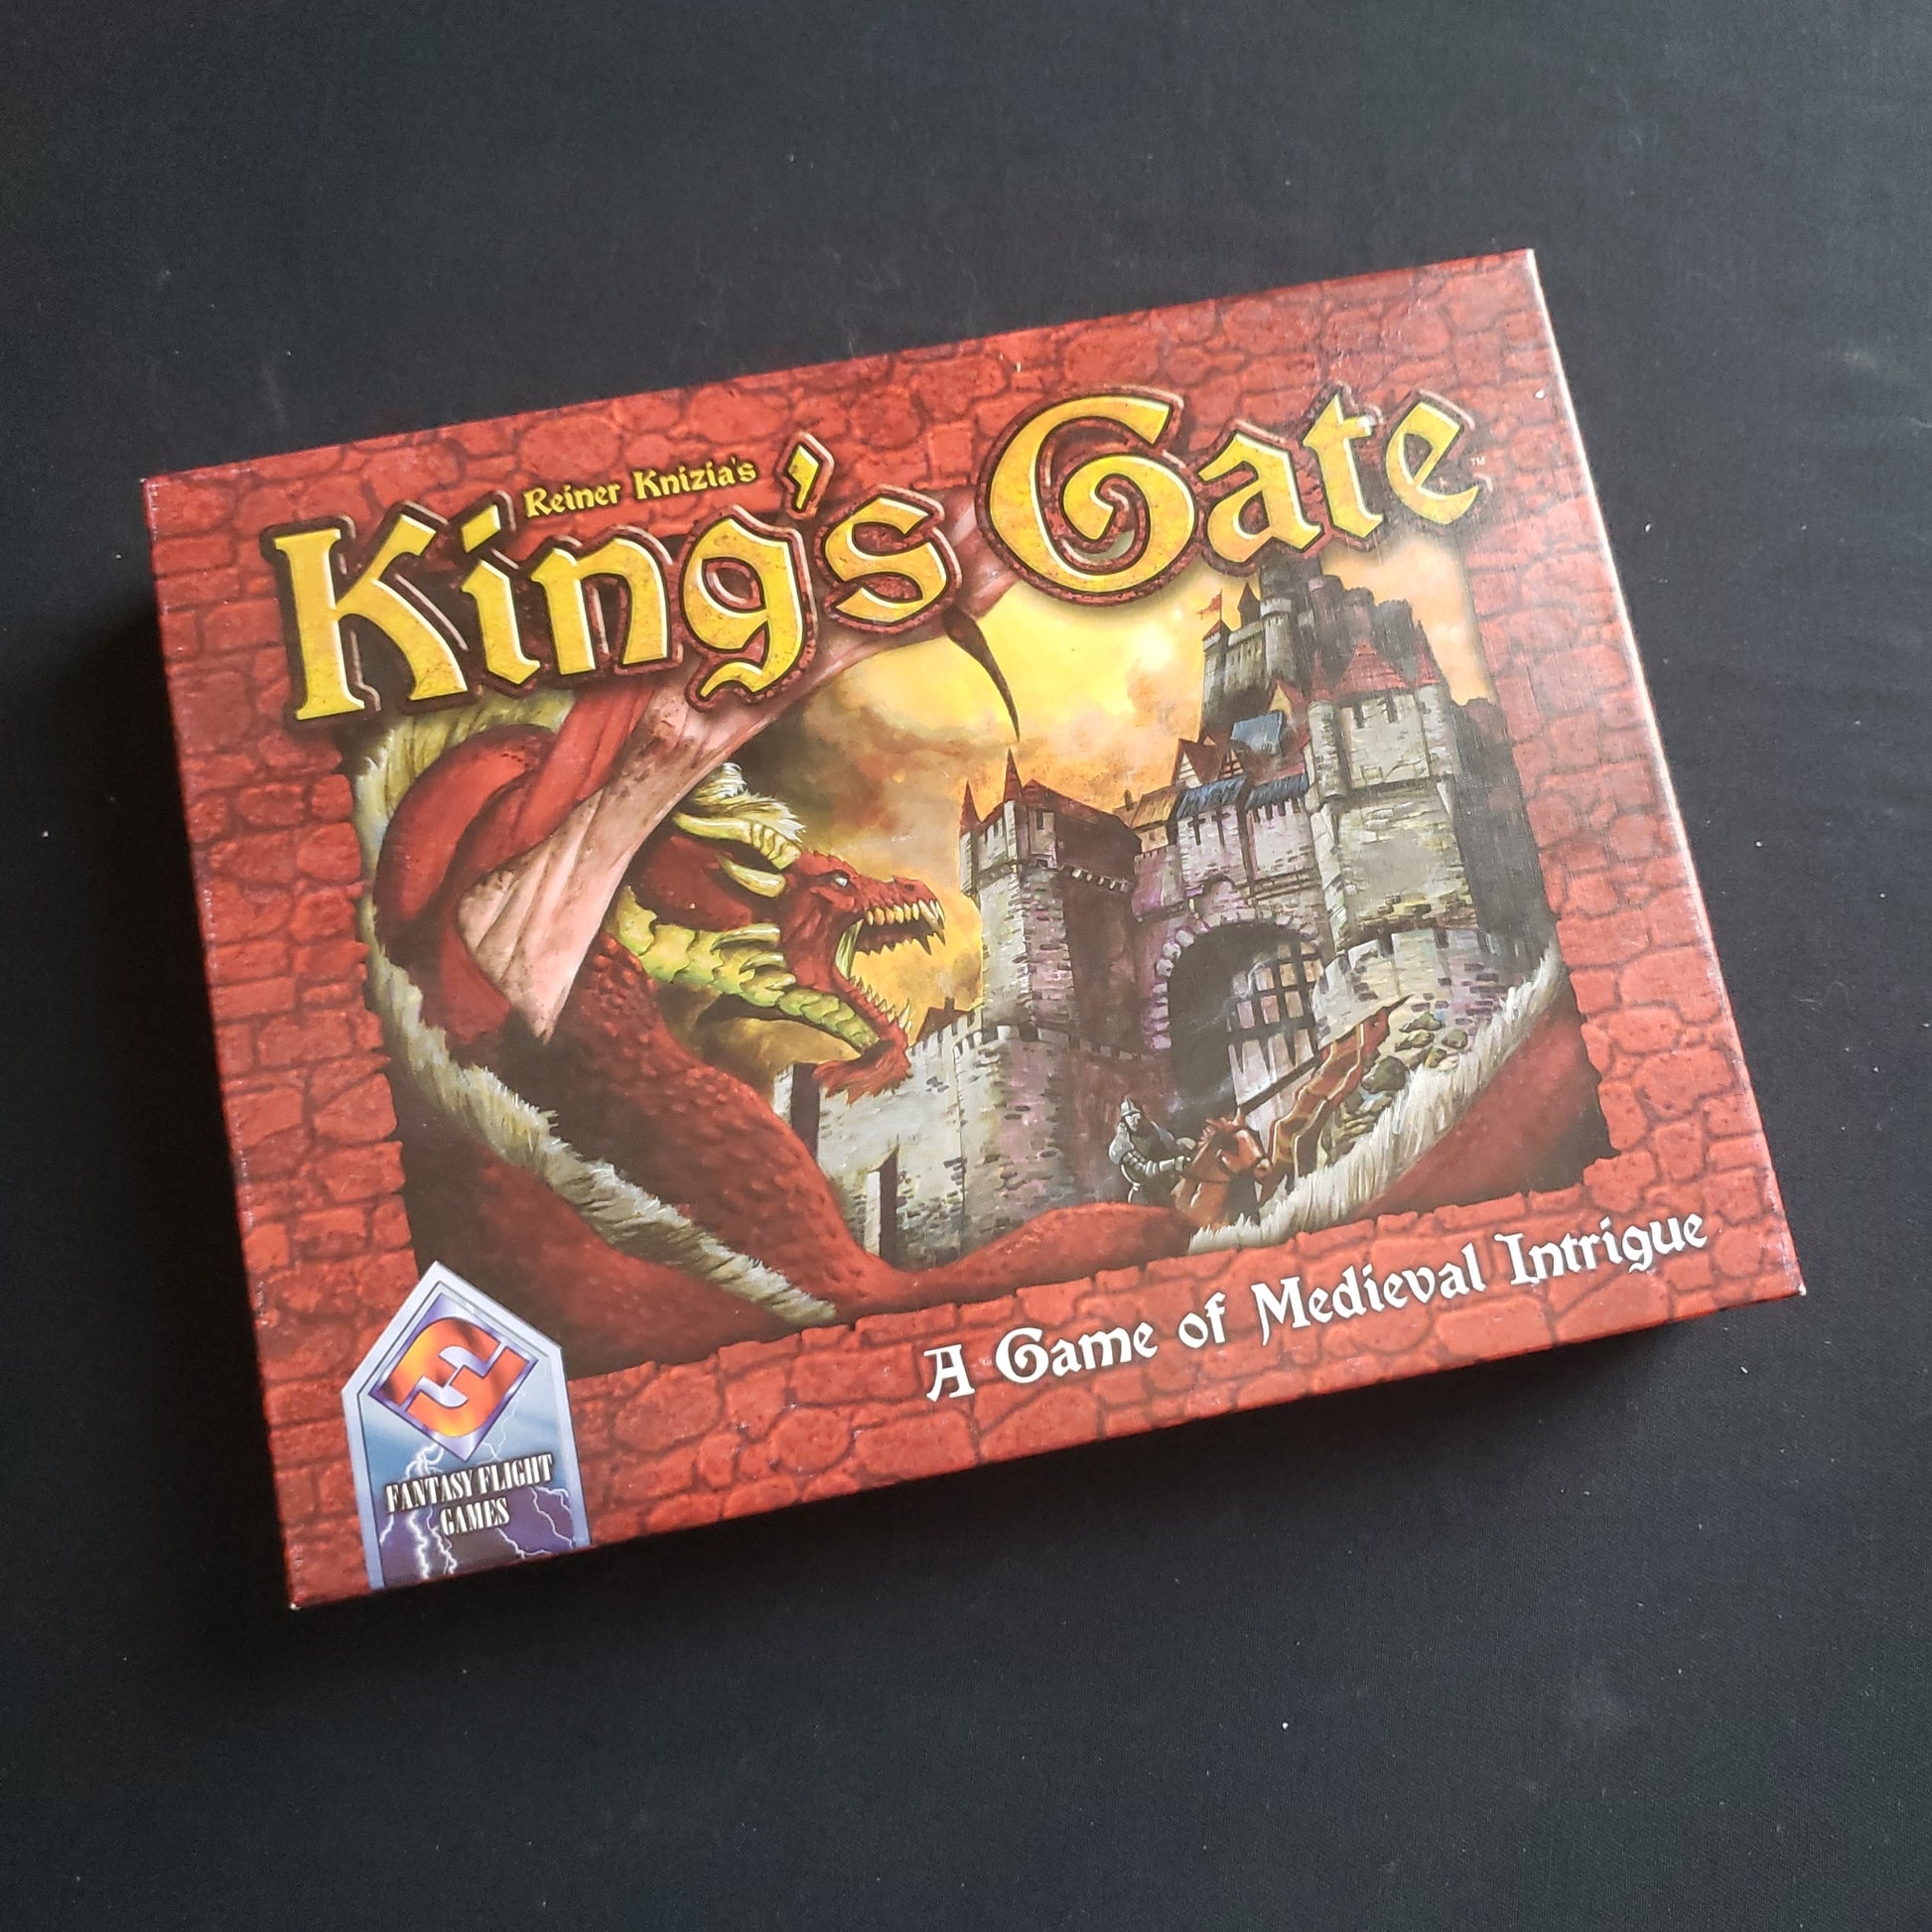 Image shows the front cover of the box of the King's Gate board game